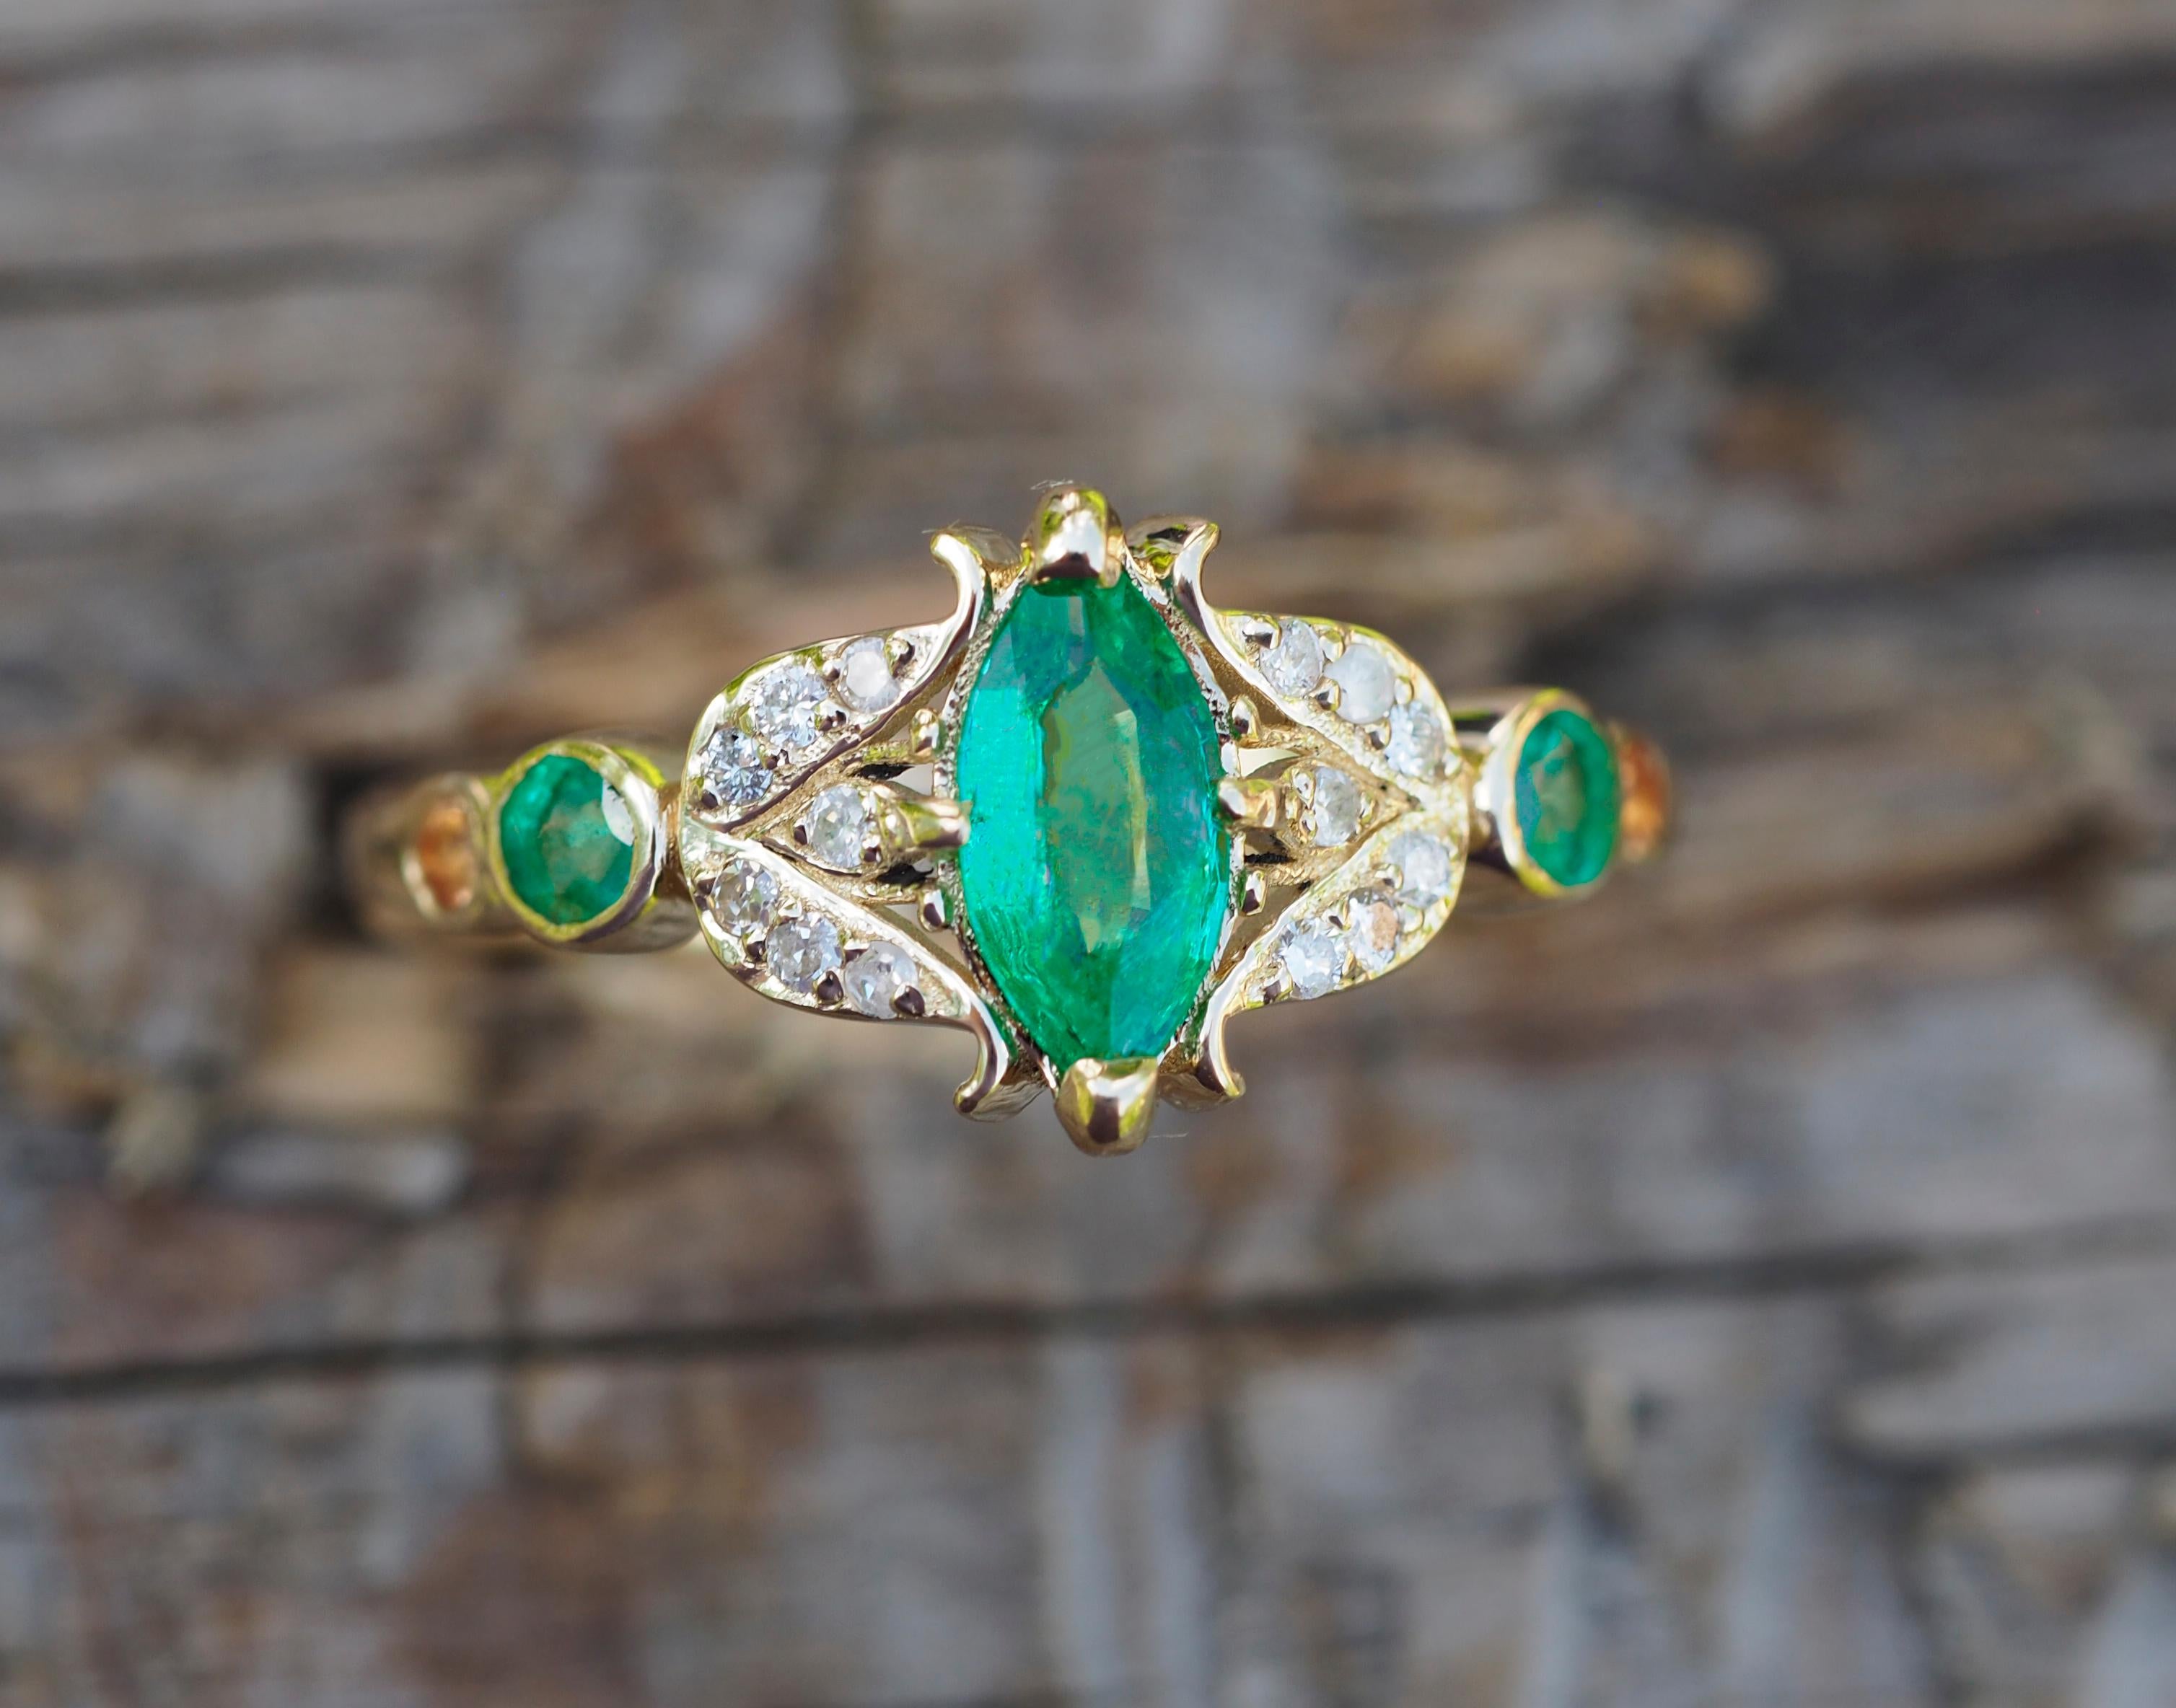 For Sale:  Gold Ring with Marquise Emerald. Vintage inspired emerald ring 3